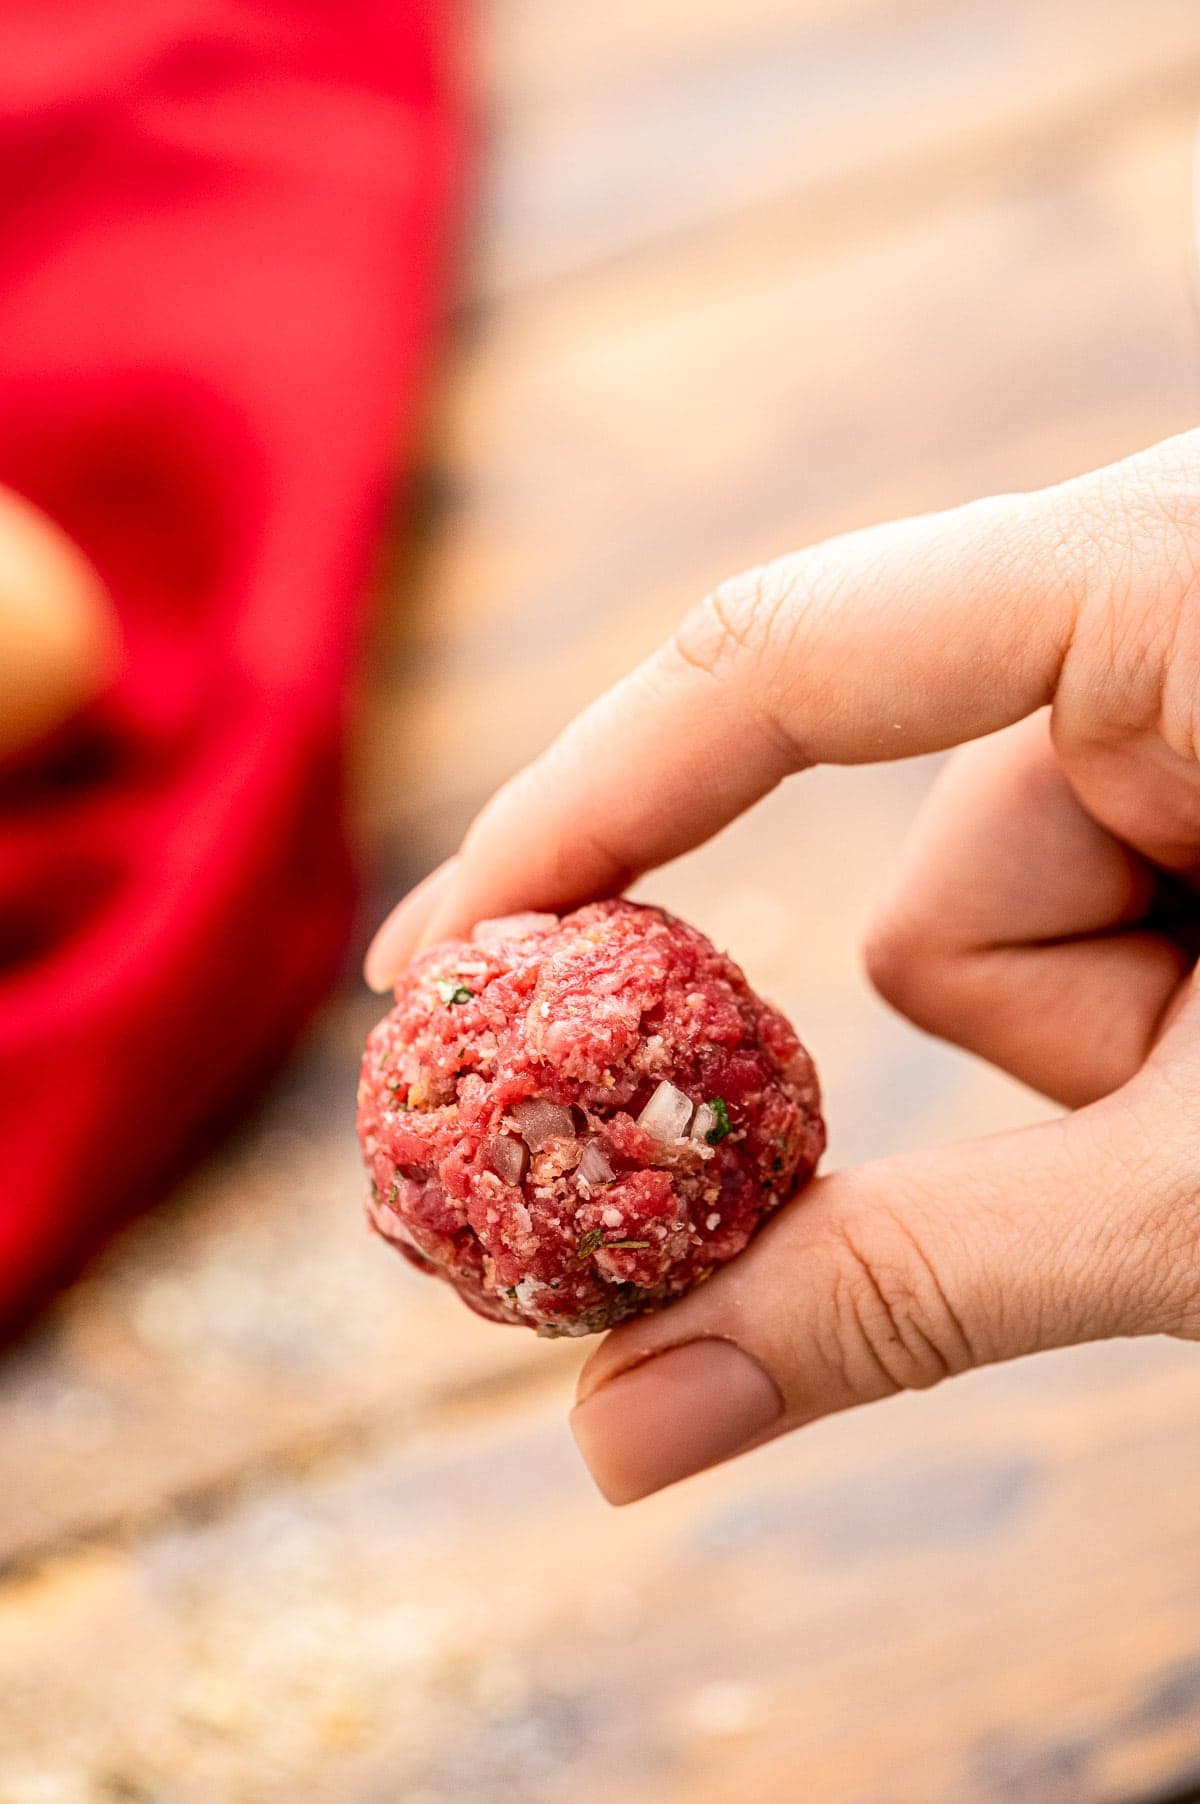 Two fingers holding raw homemade meatball